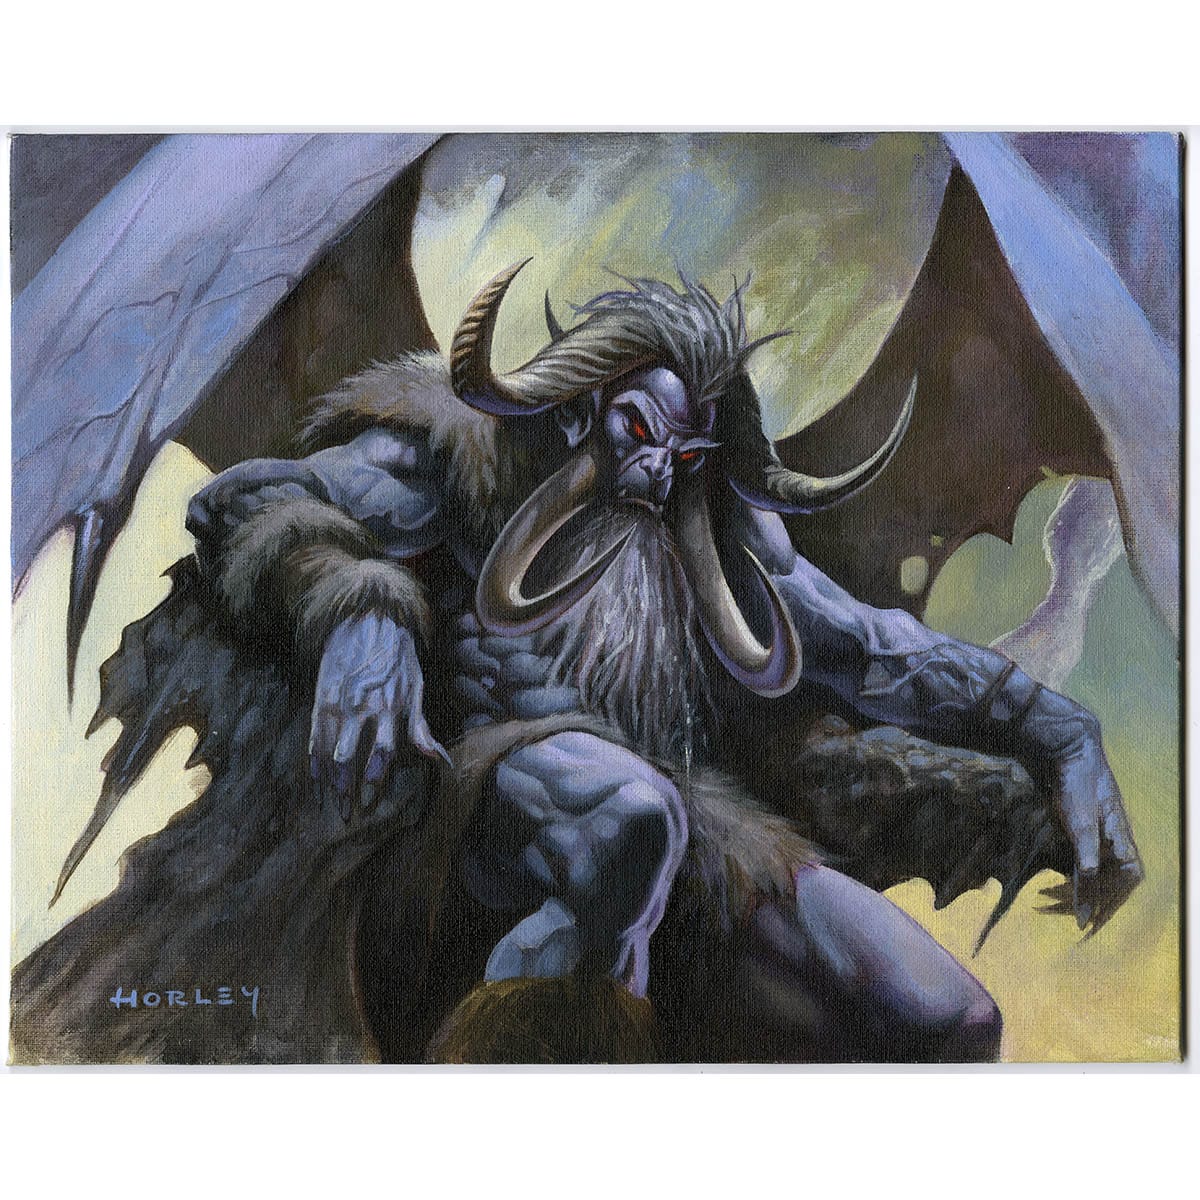 Herald of Leshrac Print - Print - Original Magic Art - Accessories for Magic the Gathering and other card games